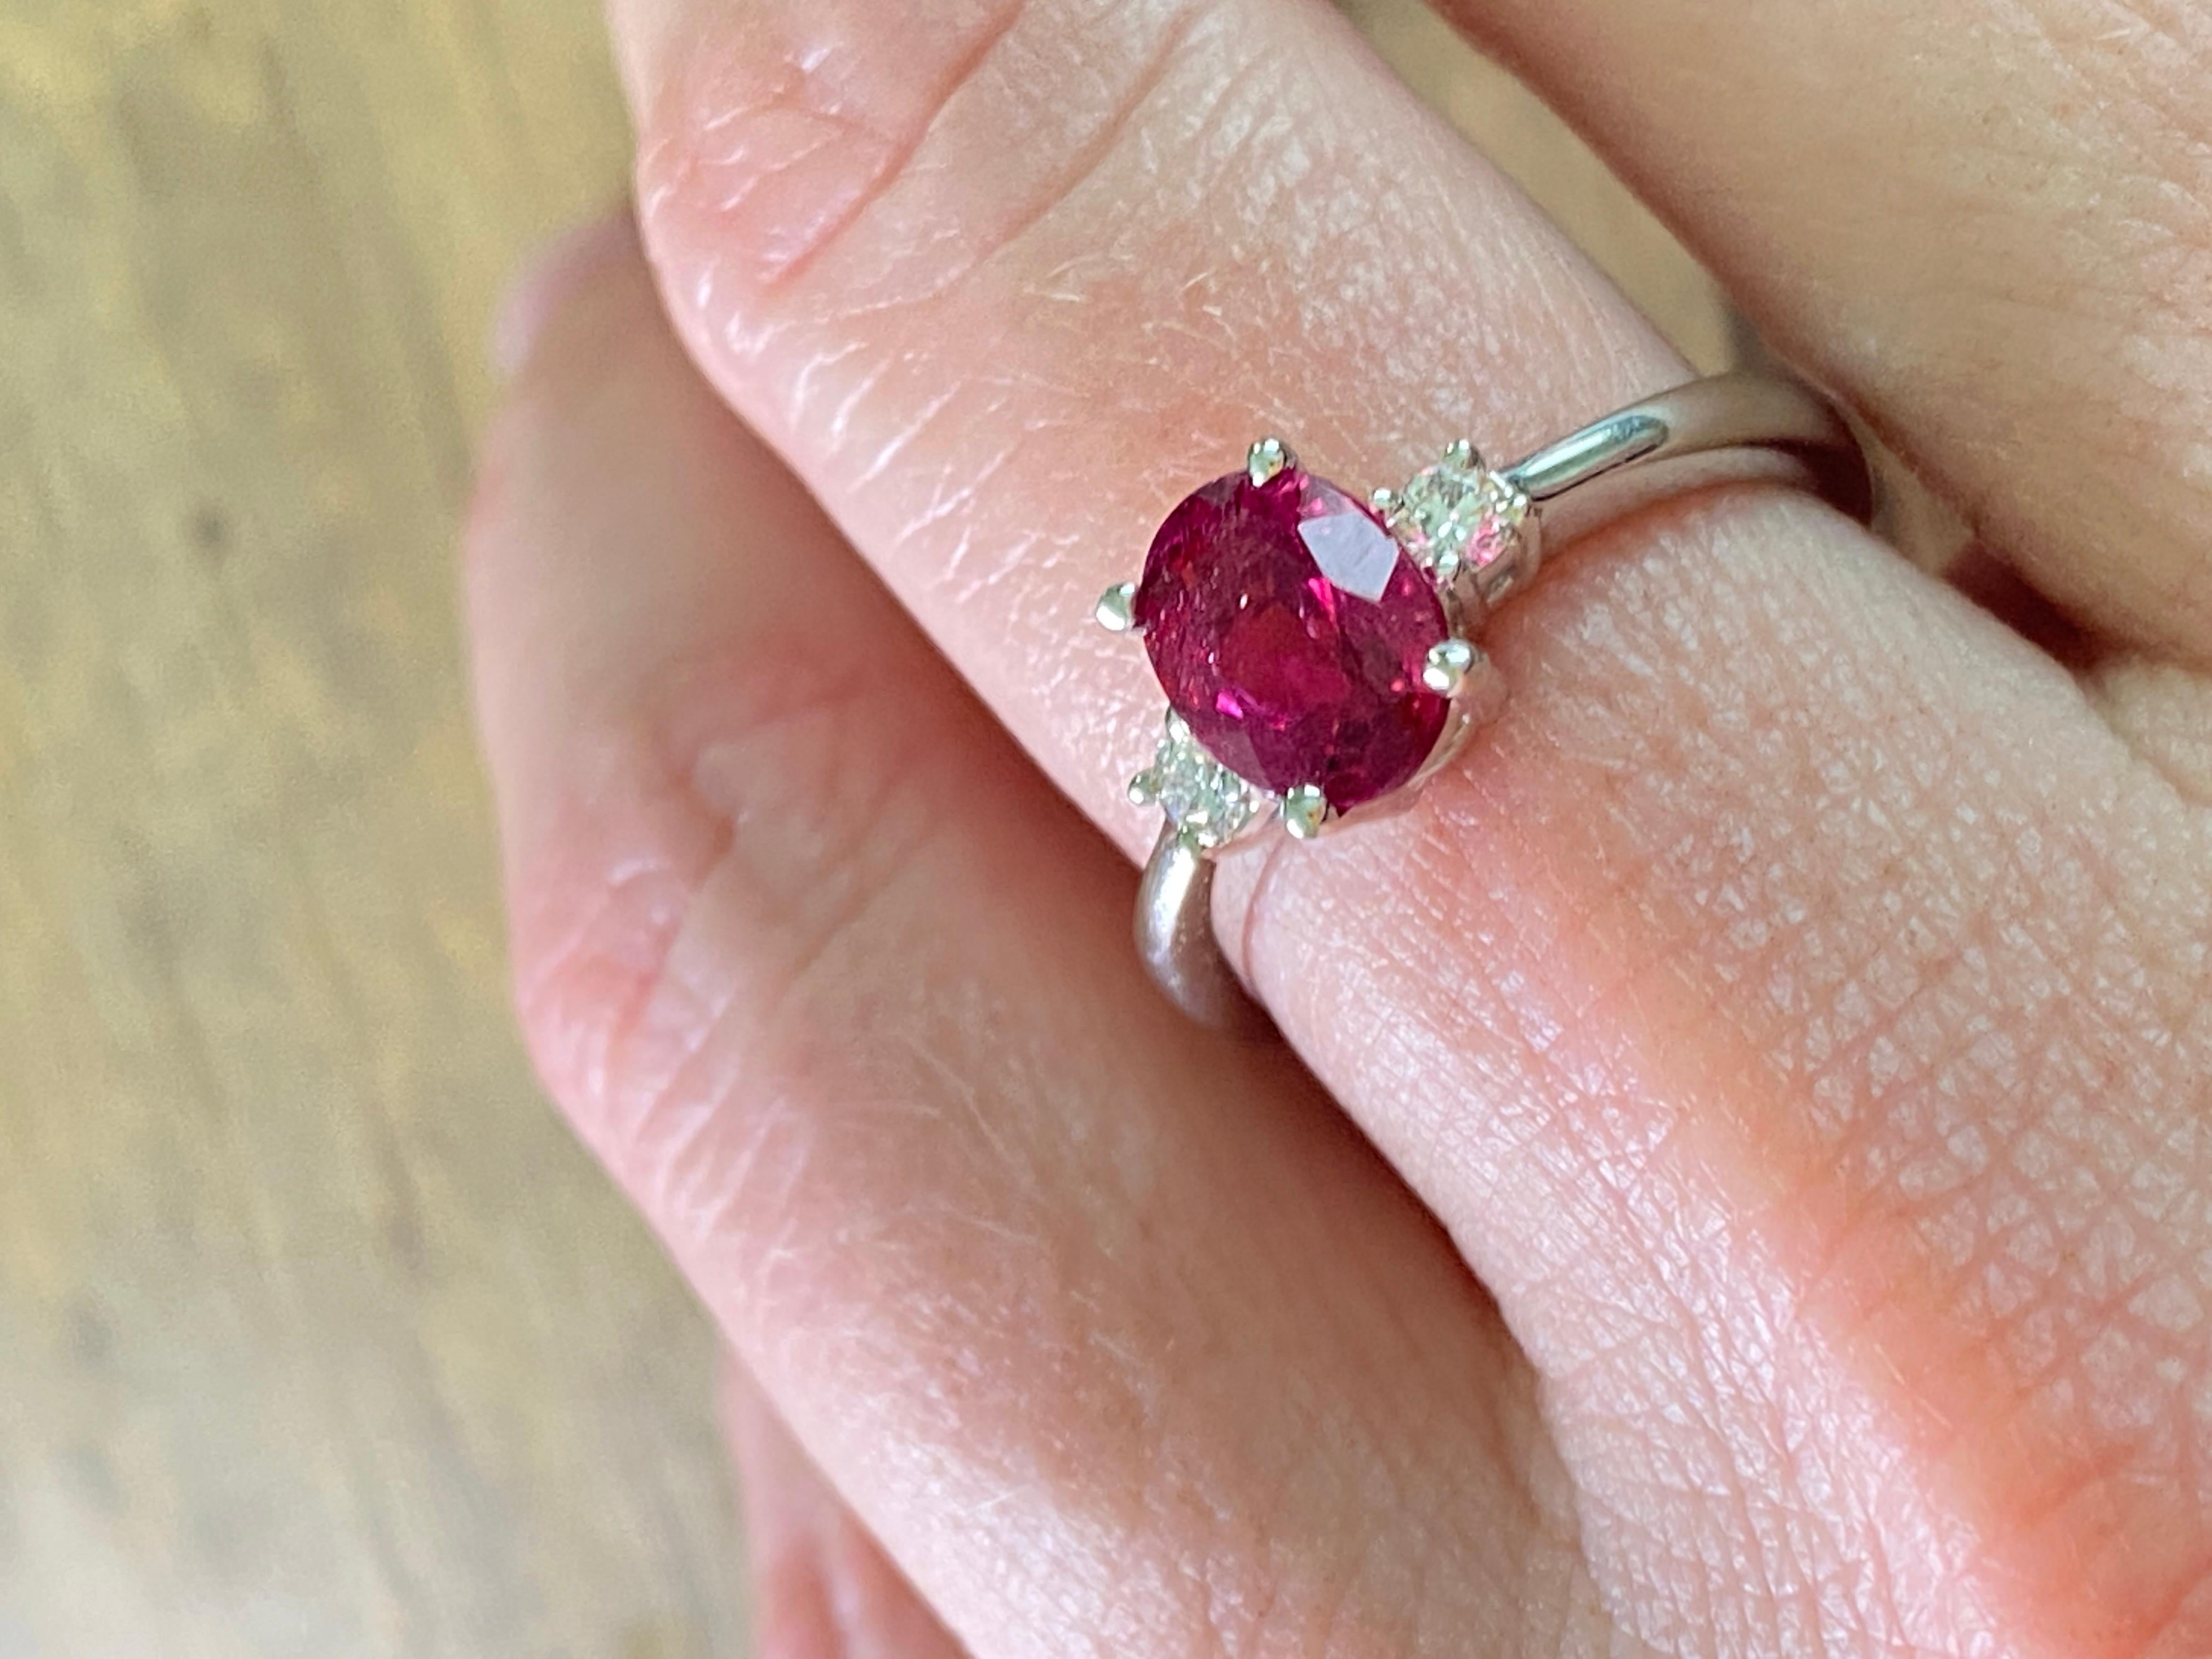 Bright, Pink, Oval Tourmaline Engagement Ring with Diamonds, 14K White Gold
Size 6 1/2
Sure stunner with this bright pink color and diamond accents.
Oval cut tourmaline is approximately 1 carat.